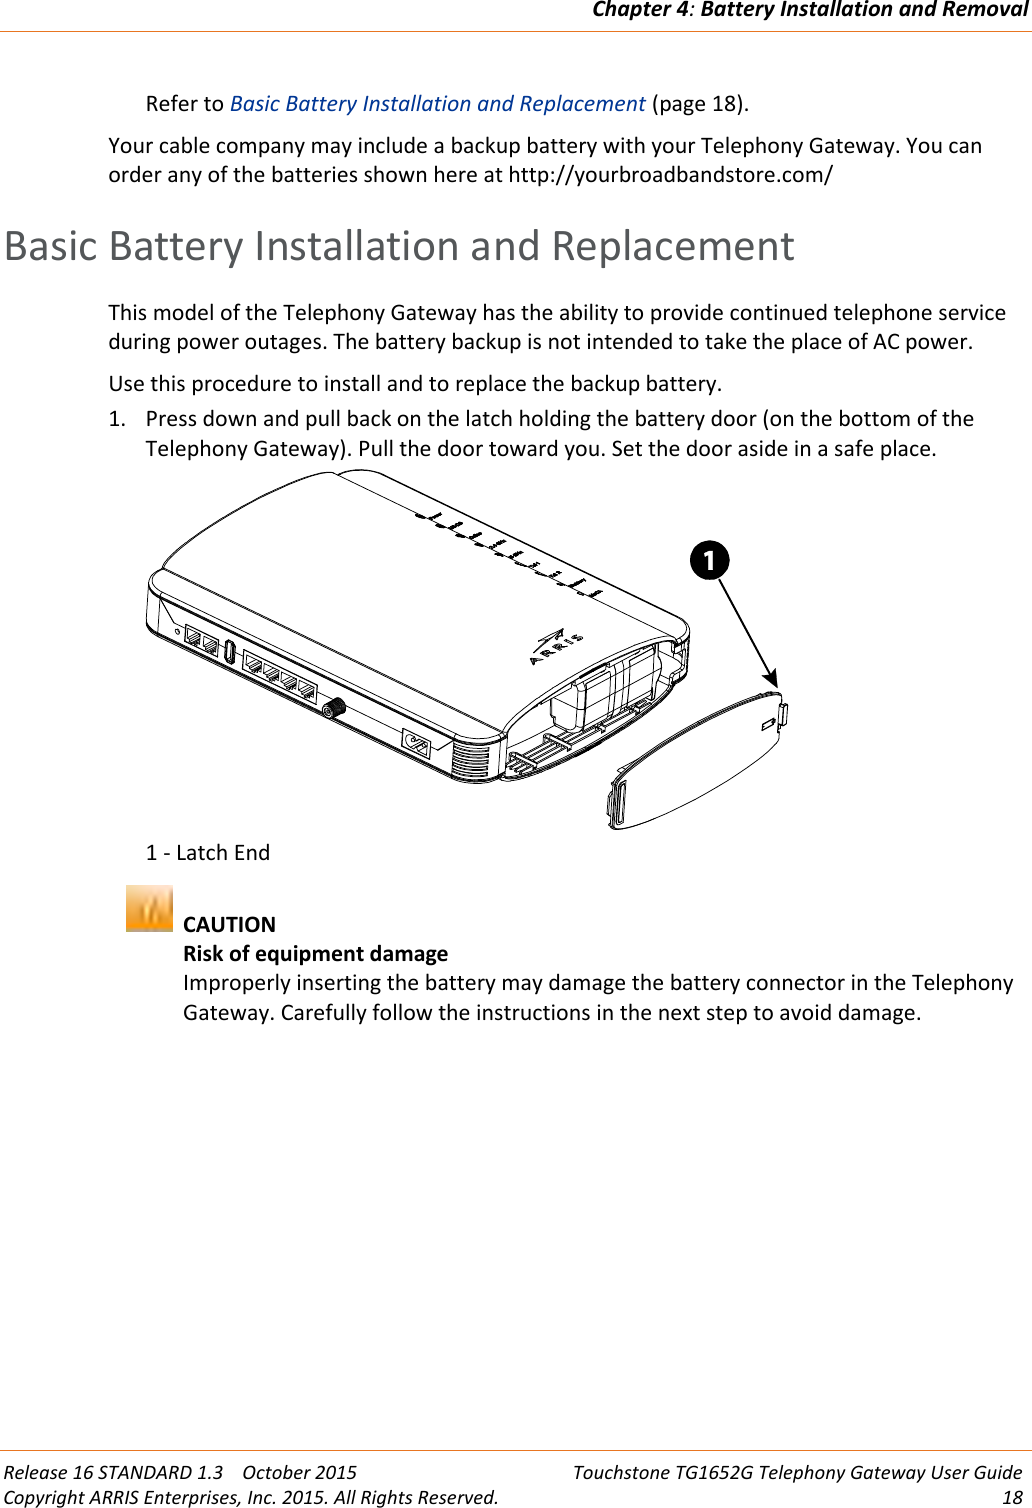 Chapter 4:Battery Installation and RemovalRelease 16 STANDARD 1.3 October 2015 Touchstone TG1652G Telephony Gateway User GuideCopyright ARRIS Enterprises, Inc. 2015. All Rights Reserved. 18Refer to Basic Battery Installation and Replacement (page 18).Your cable company may include a backup battery with your Telephony Gateway. You canorder any of the batteries shown here at http://yourbroadbandstore.com/Basic Battery Installation and ReplacementThis model of the Telephony Gateway has the ability to provide continued telephone serviceduring power outages. The battery backup is not intended to take the place of AC power.Use this procedure to install and to replace the backup battery.1. Press down and pull back on the latch holding the battery door (on the bottom of theTelephony Gateway). Pull the door toward you. Set the door aside in a safe place.1 - Latch EndCAUTIONRisk of equipment damageImproperly inserting the battery may damage the battery connector in the TelephonyGateway. Carefully follow the instructions in the next step to avoid damage.